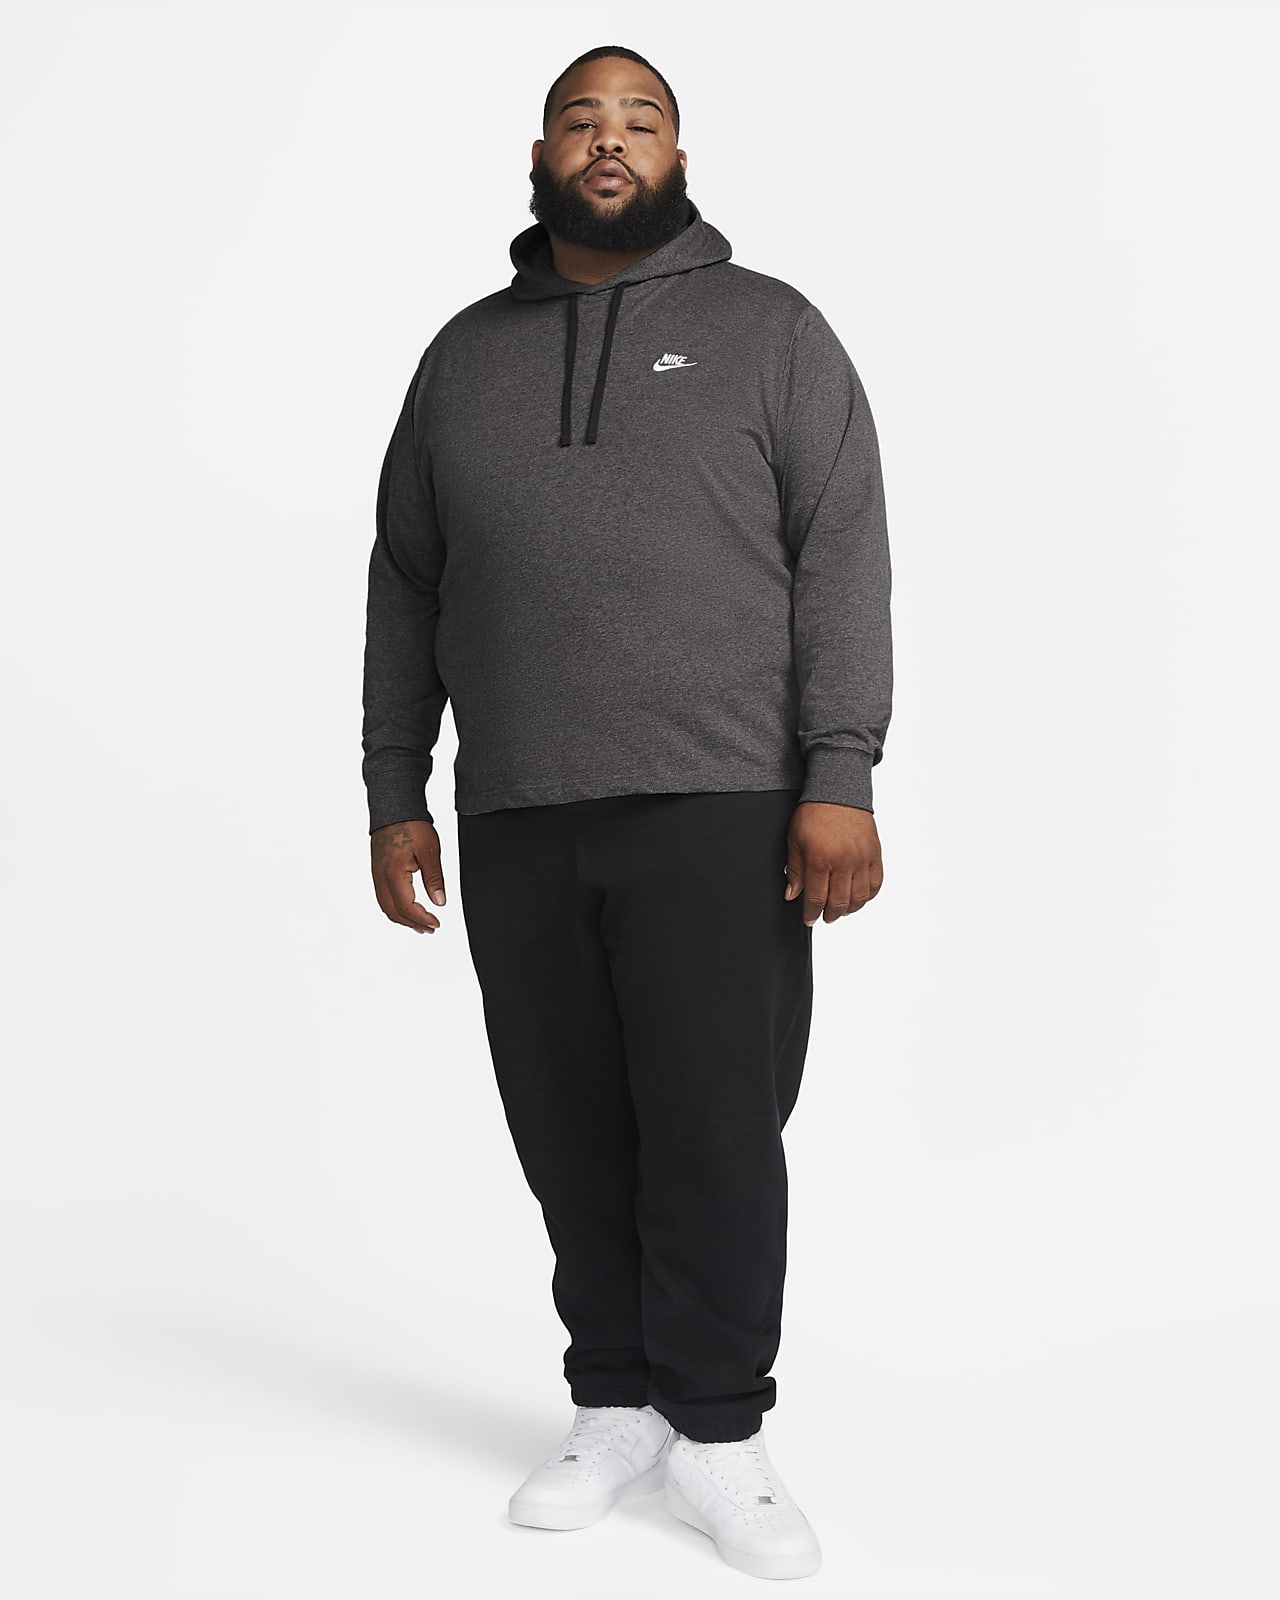 Grey Jersey Drawstring Hoodie And Joggers Outfit